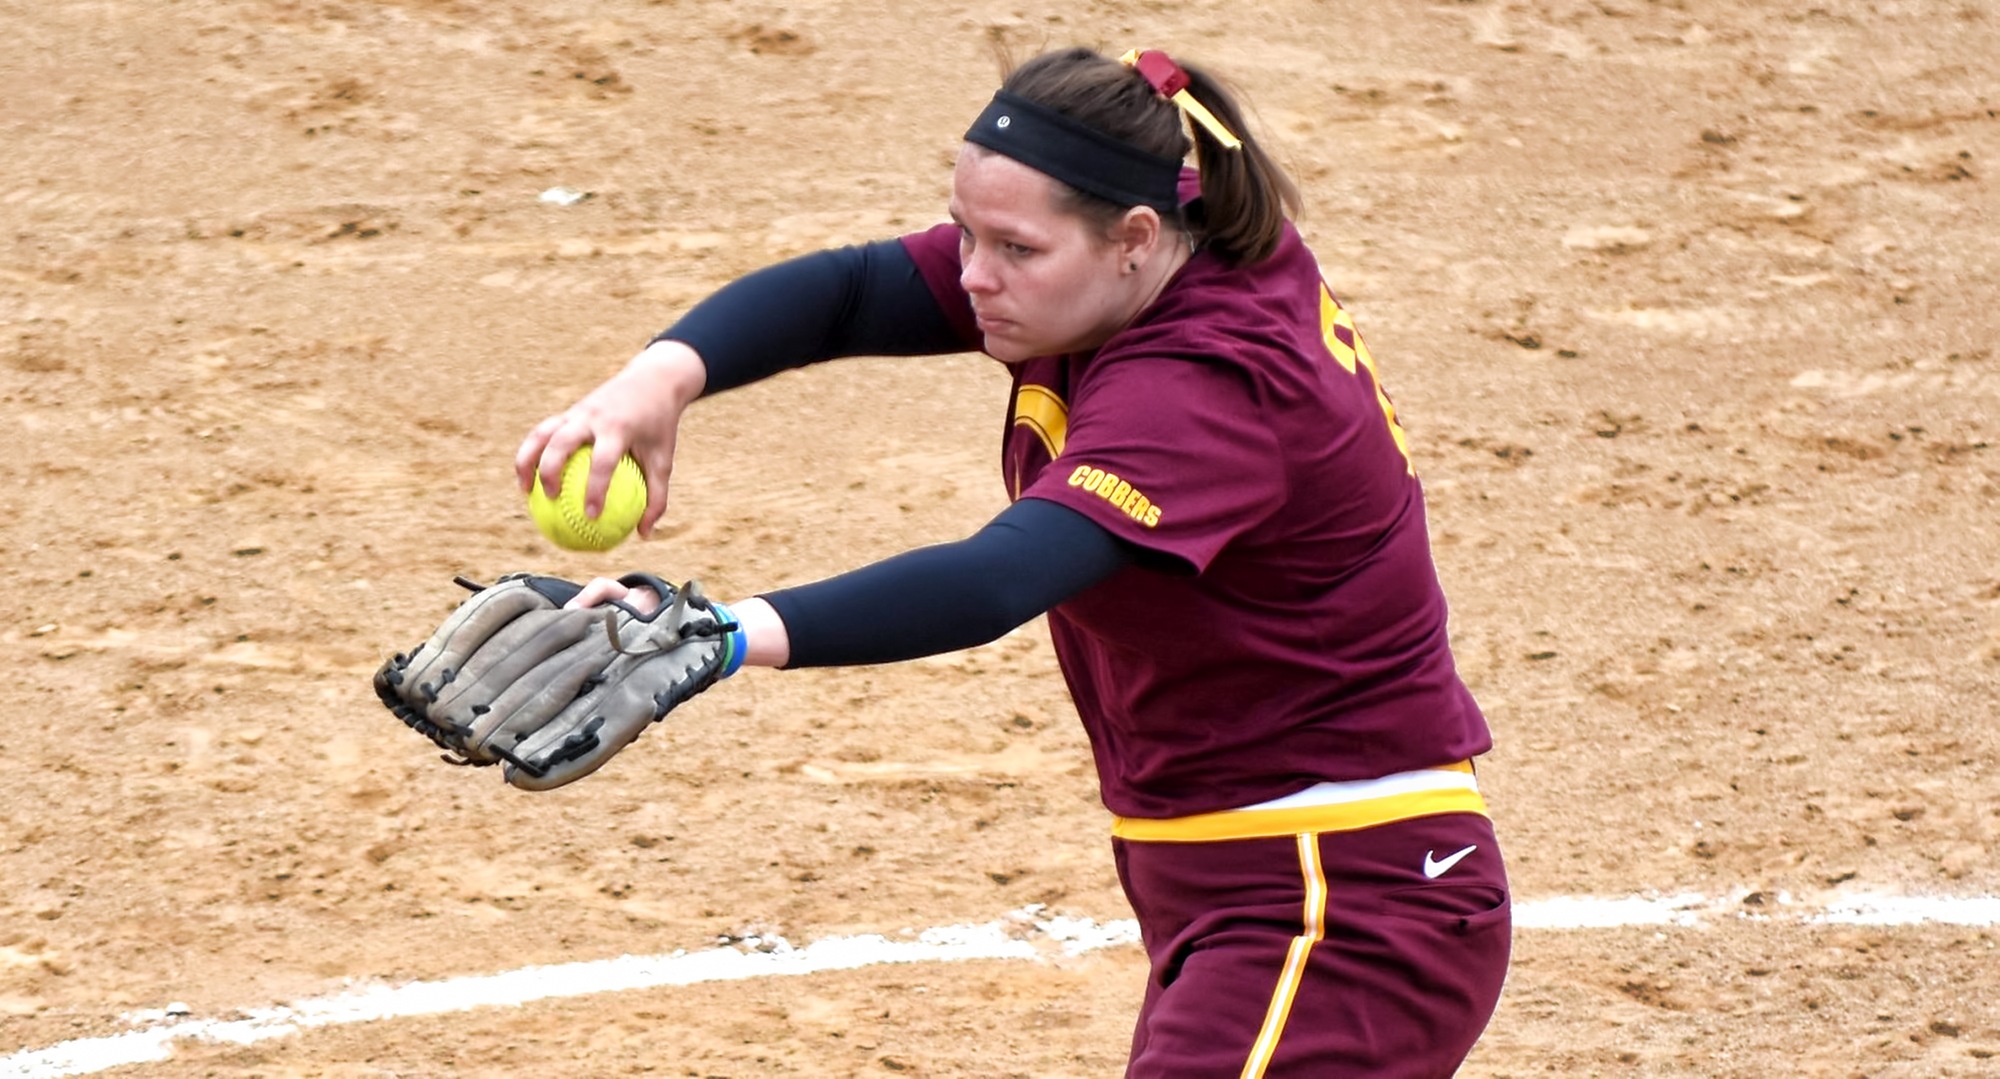 Senior Abby Haraldson gets ready to deliver a pitch during the final game of her college career. She pitched a complete-game shutout to help the Cobbers sweep UM-Morris 8-7, 8-0.